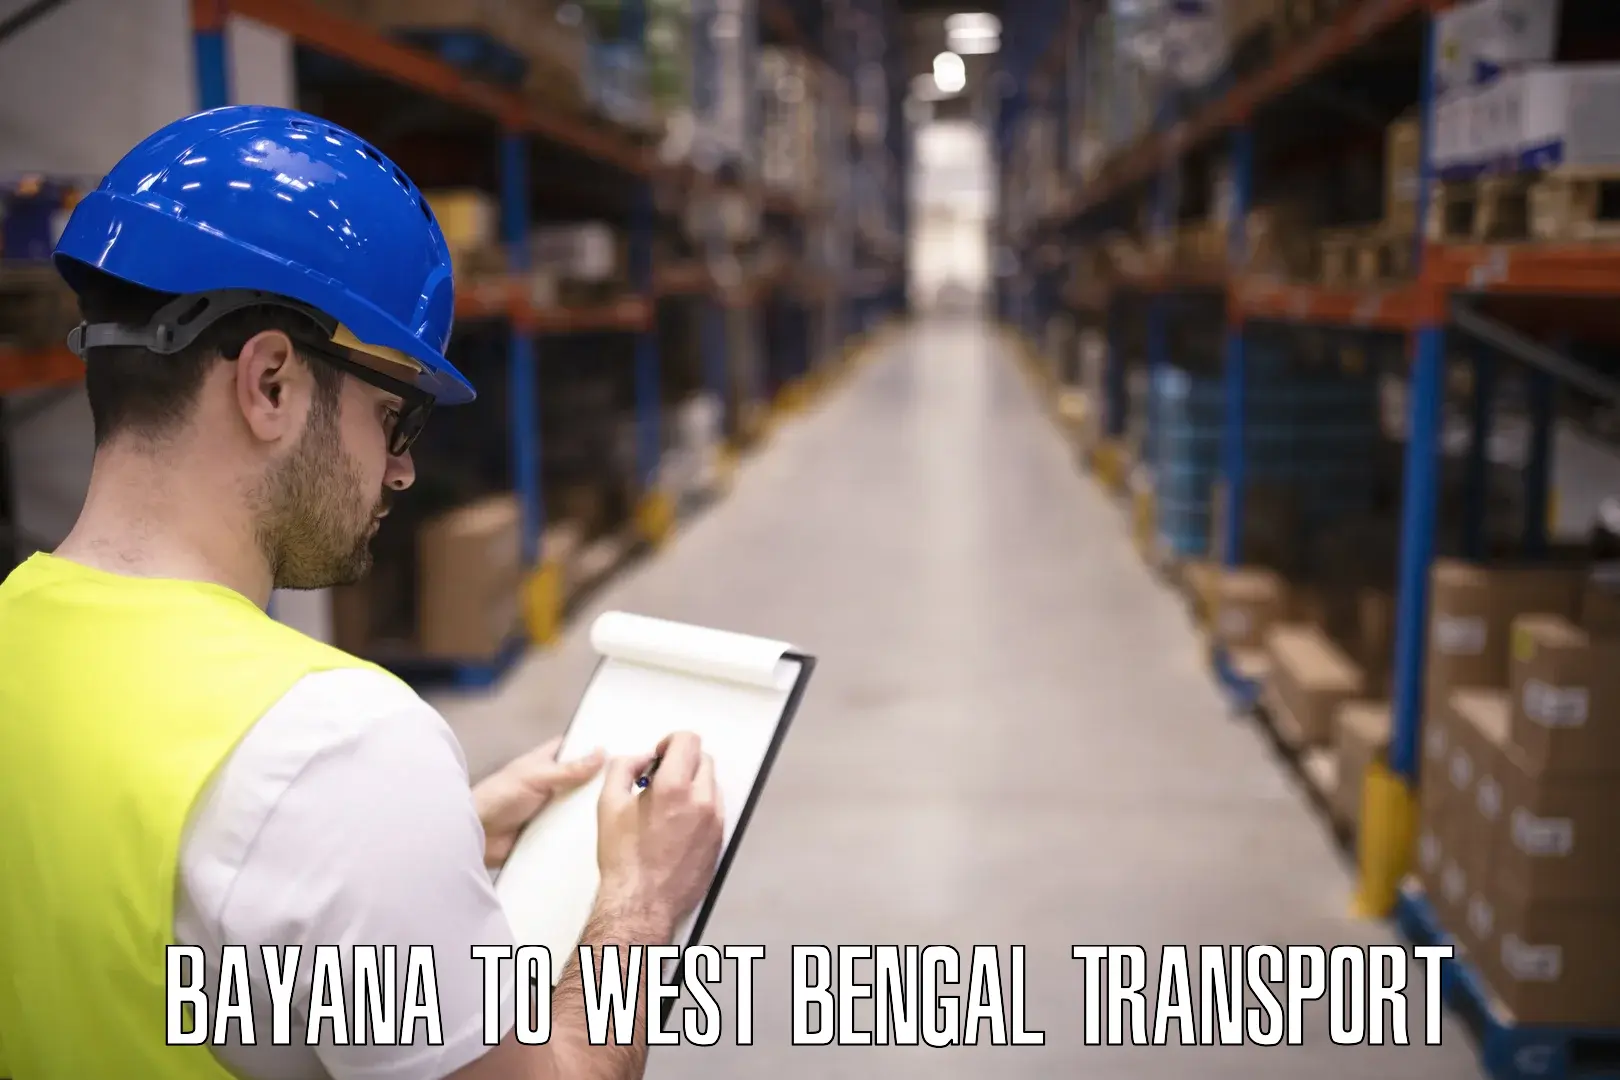 Nearest transport service Bayana to West Bengal